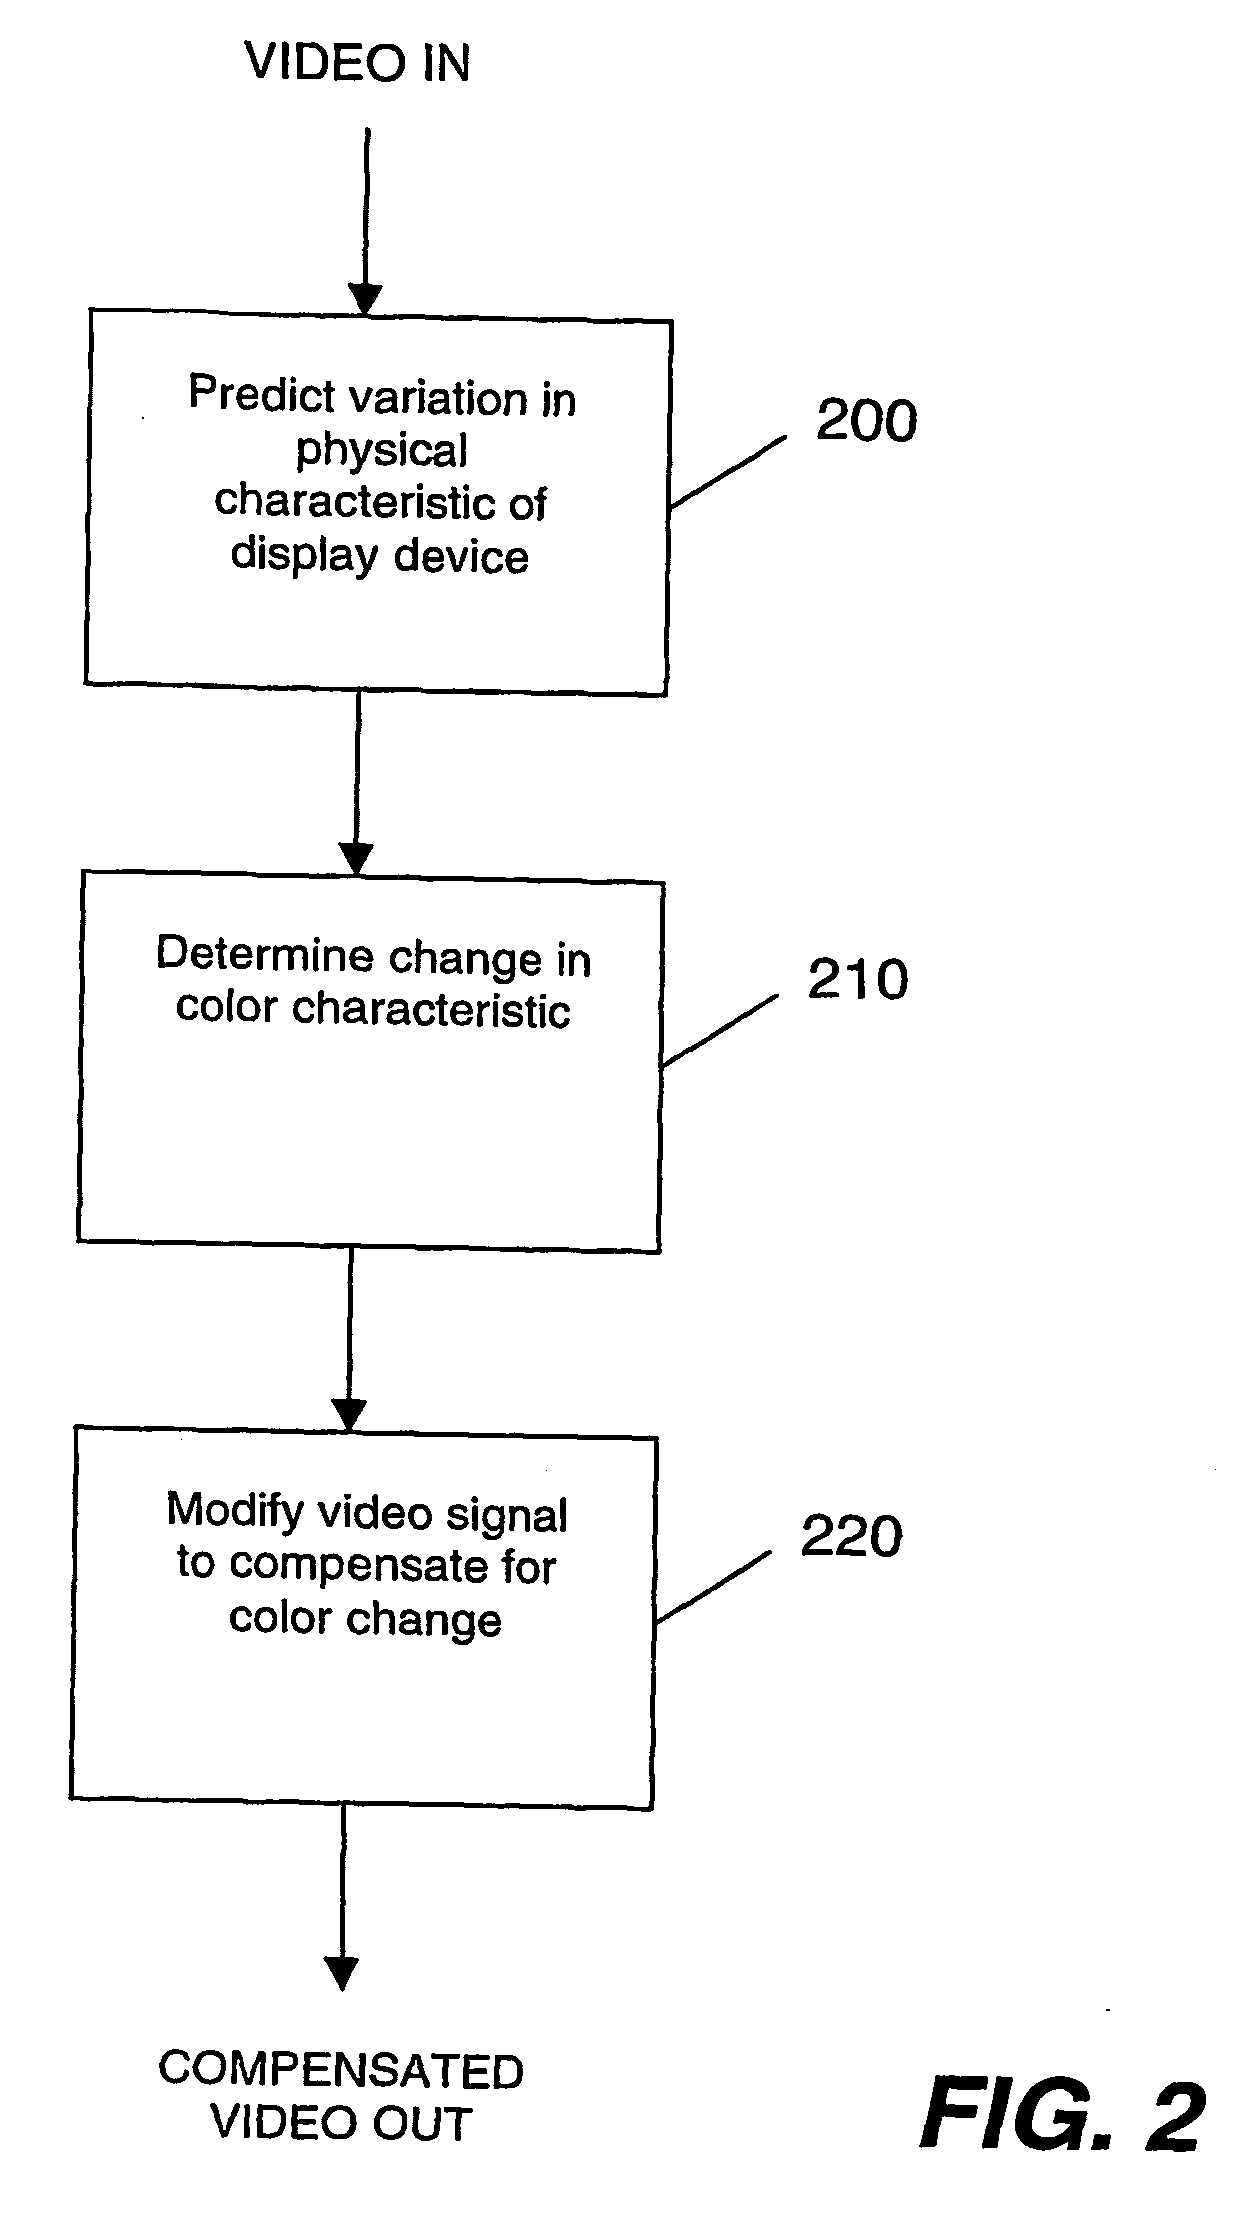 System for maintaining white uniformity in a displayed video image by predicting and compensating for display register changes